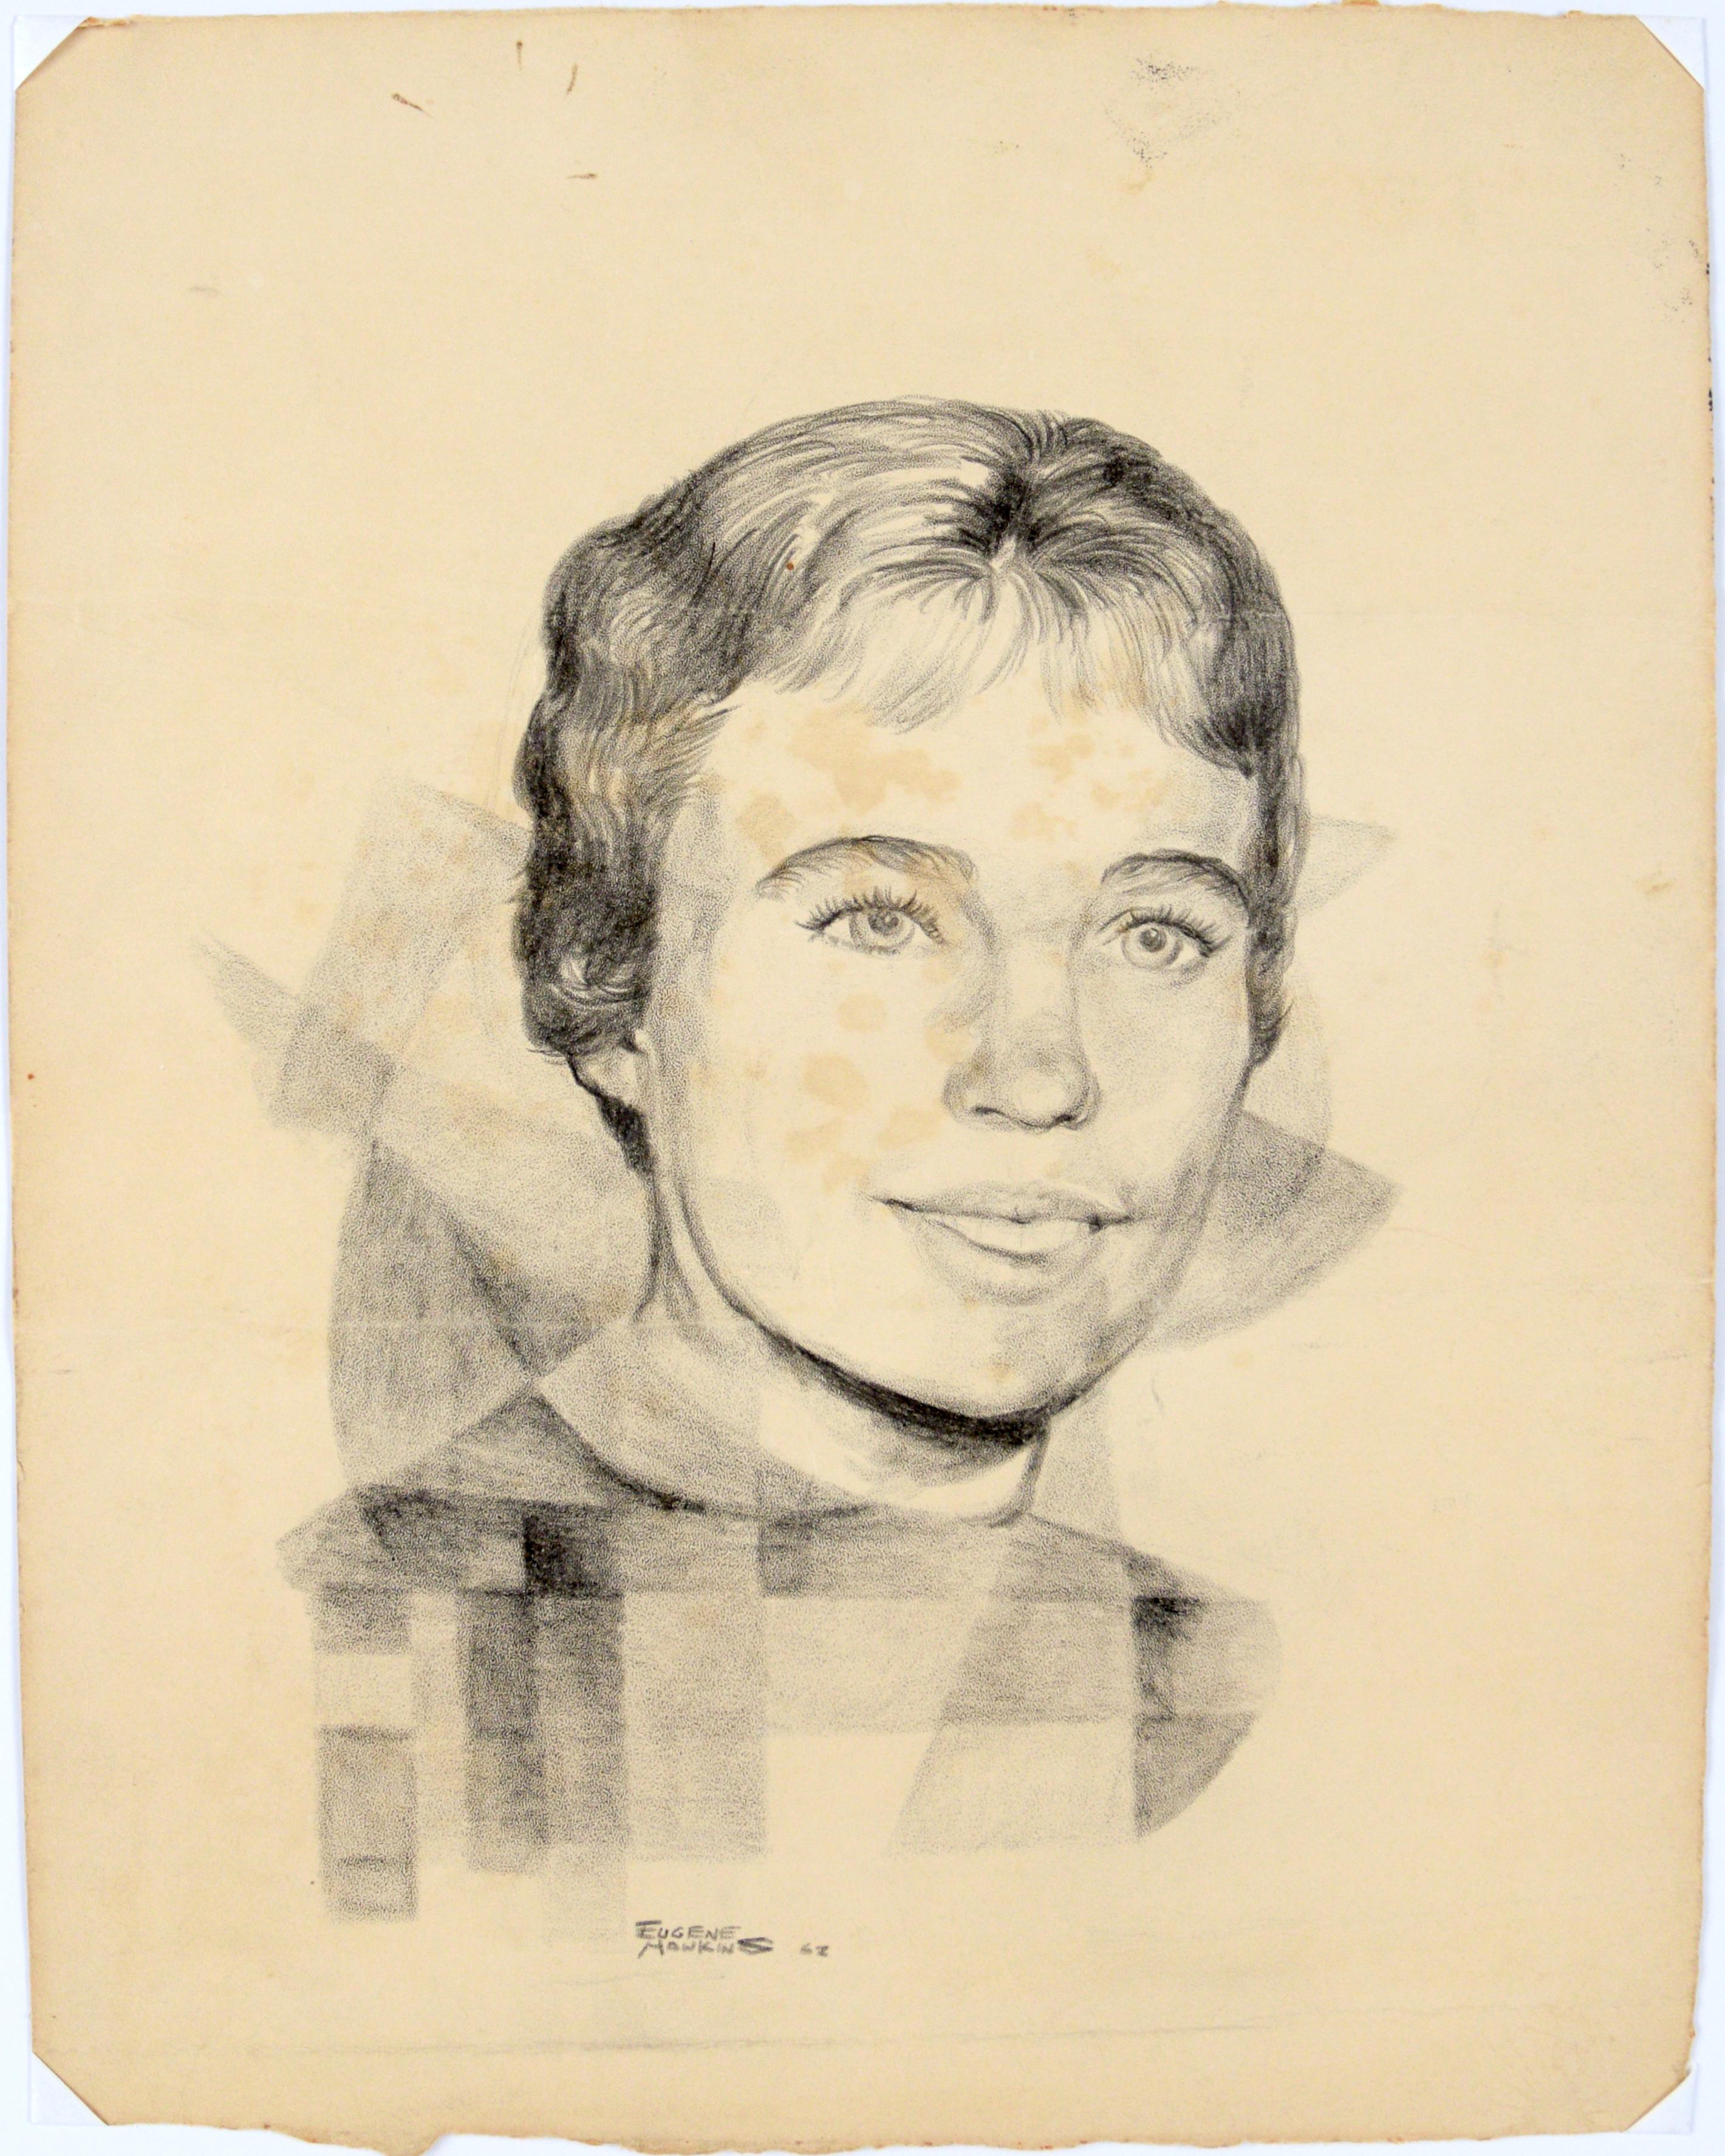 Geometric Woman's Portrait - Rare Signed Graphite Drawing on Paper 1962

Beautiful, soft original drawing by Eugene Hawkins (American, b. 1933). A realistic depiction of a short-haired woman, her large lips parted into a soft smile. She's surrounded